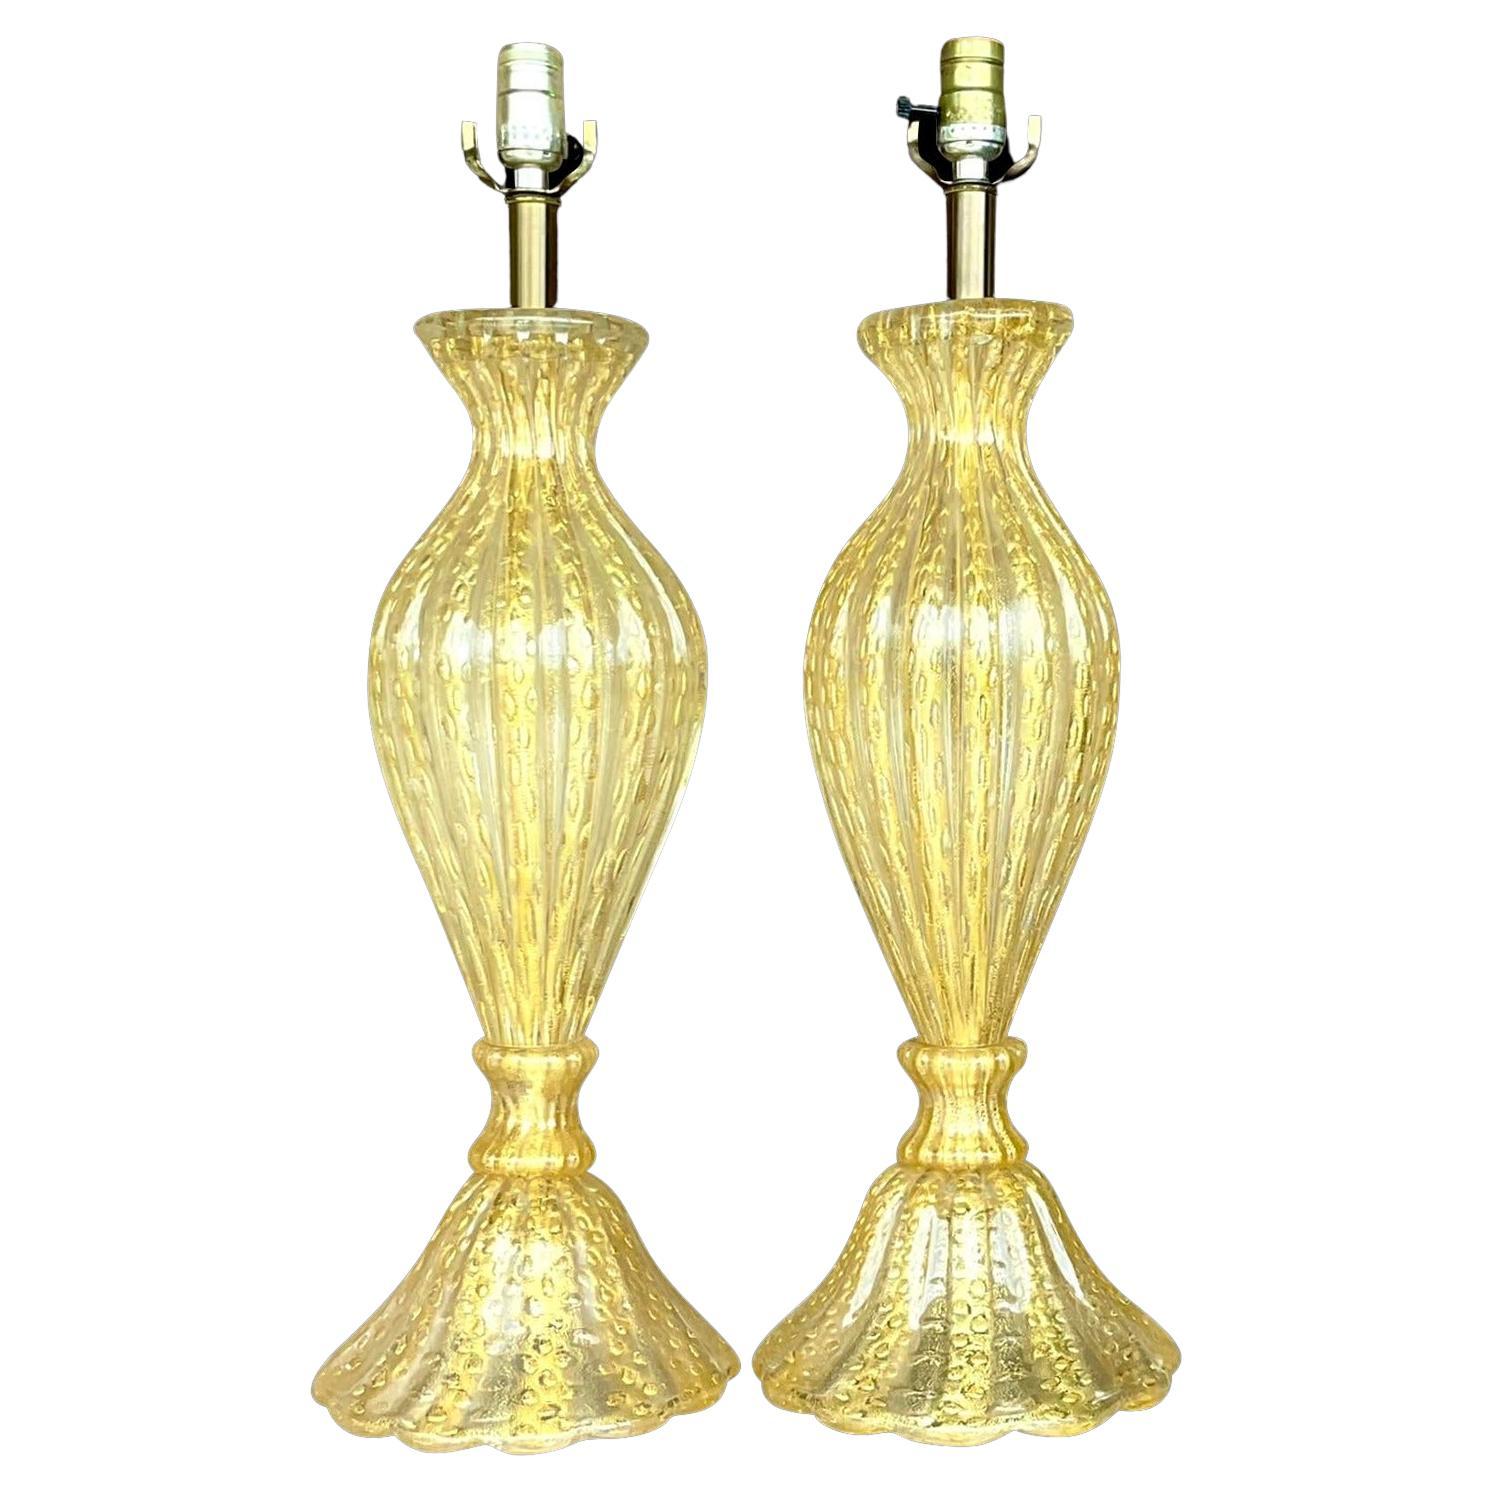 Vintage Regency Restored Murano Glass Table Lamps - a Pair